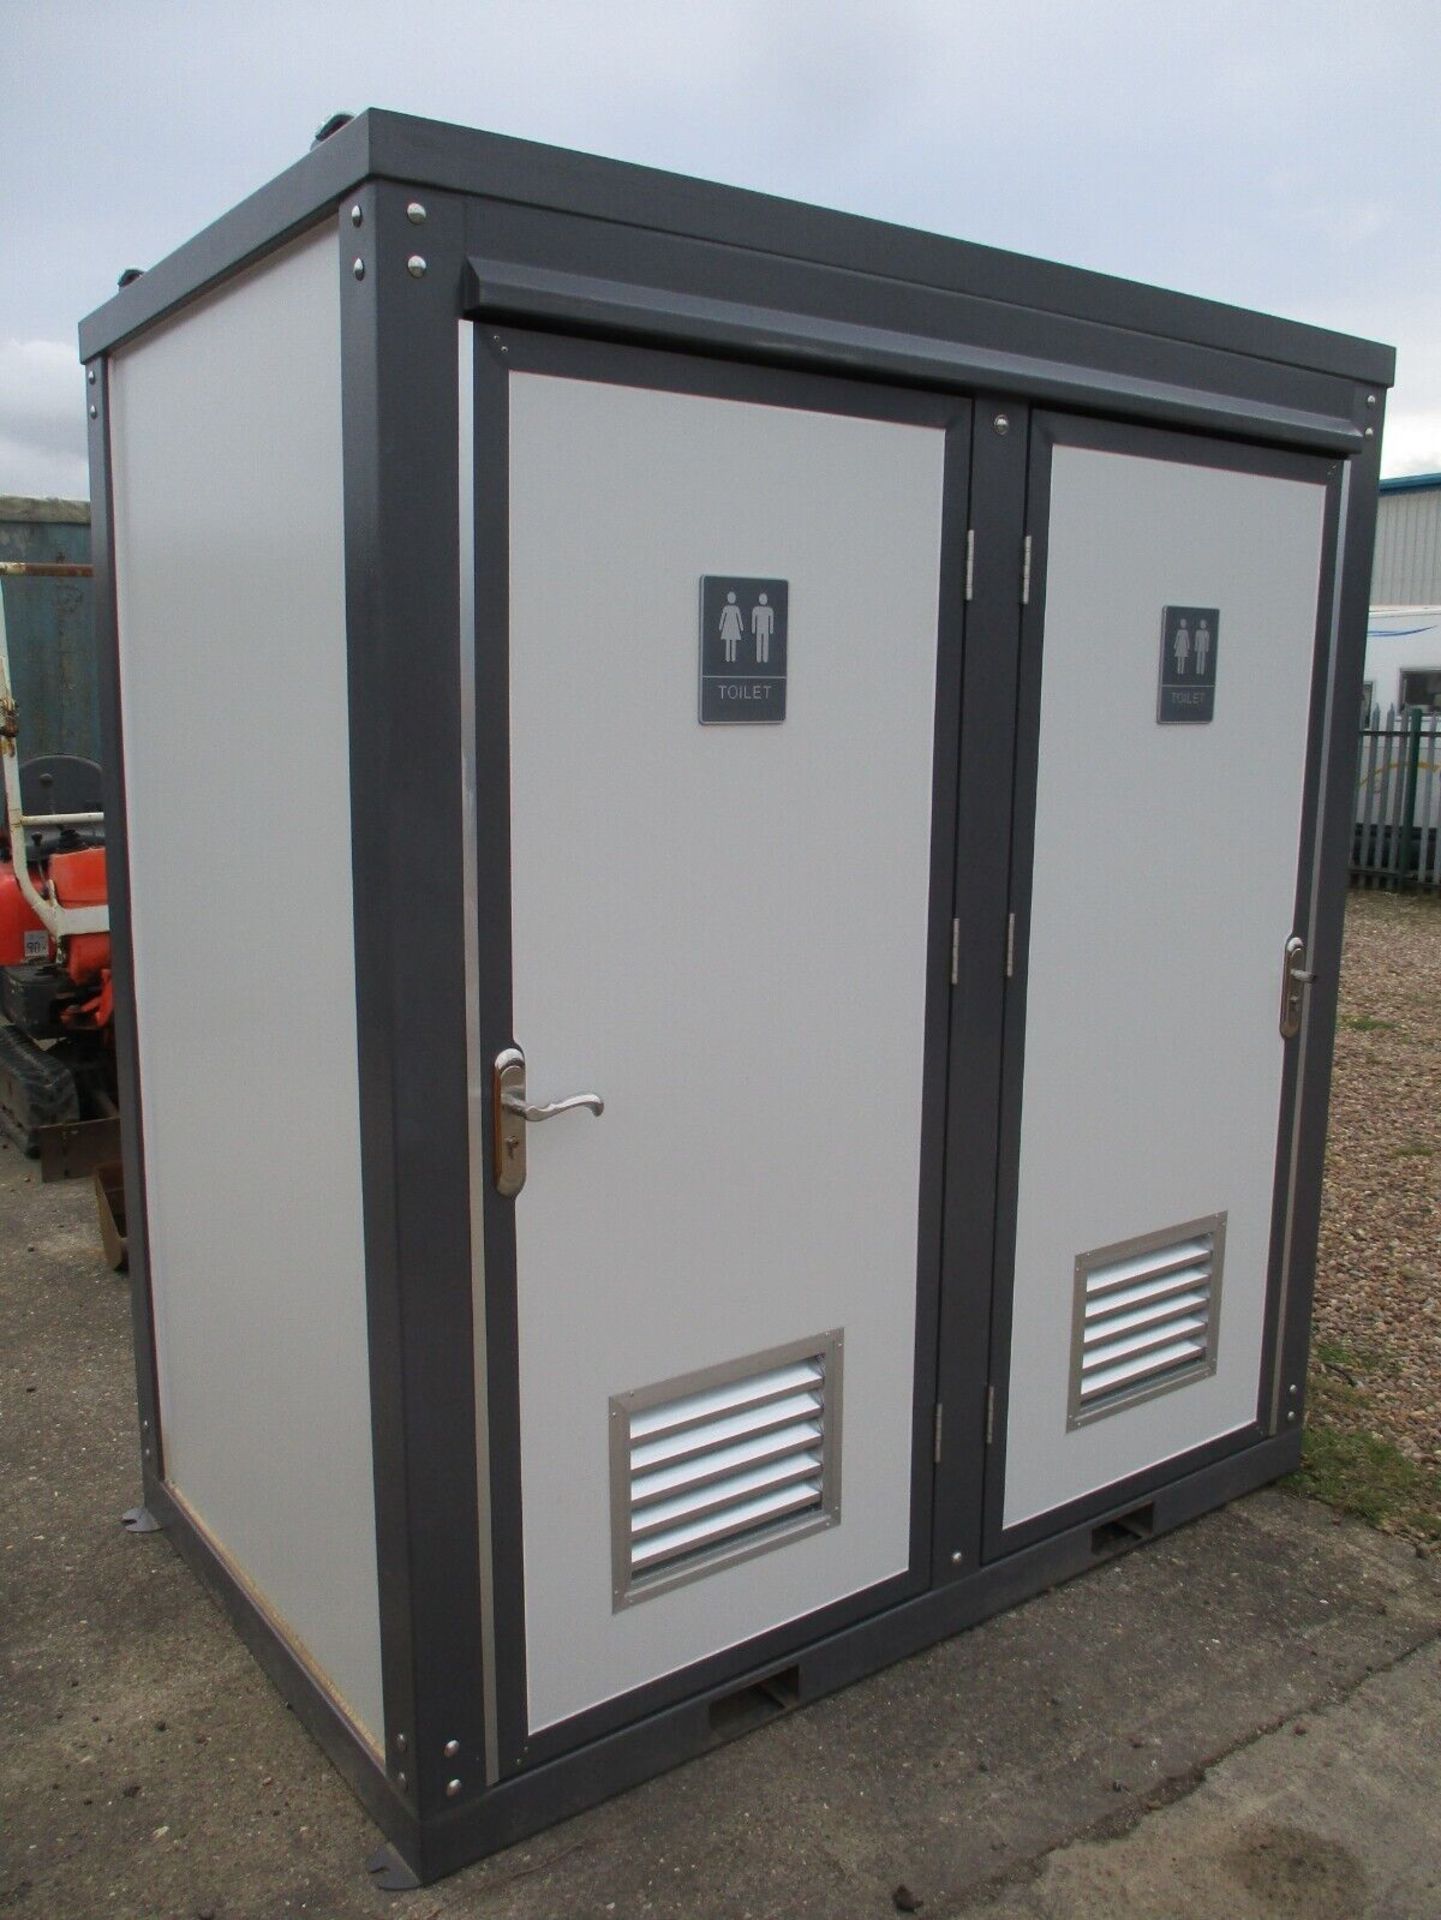 COMPACT COMFORT: 2.15M X 1.3M SHIPPING CONTAINER TOILET OASIS